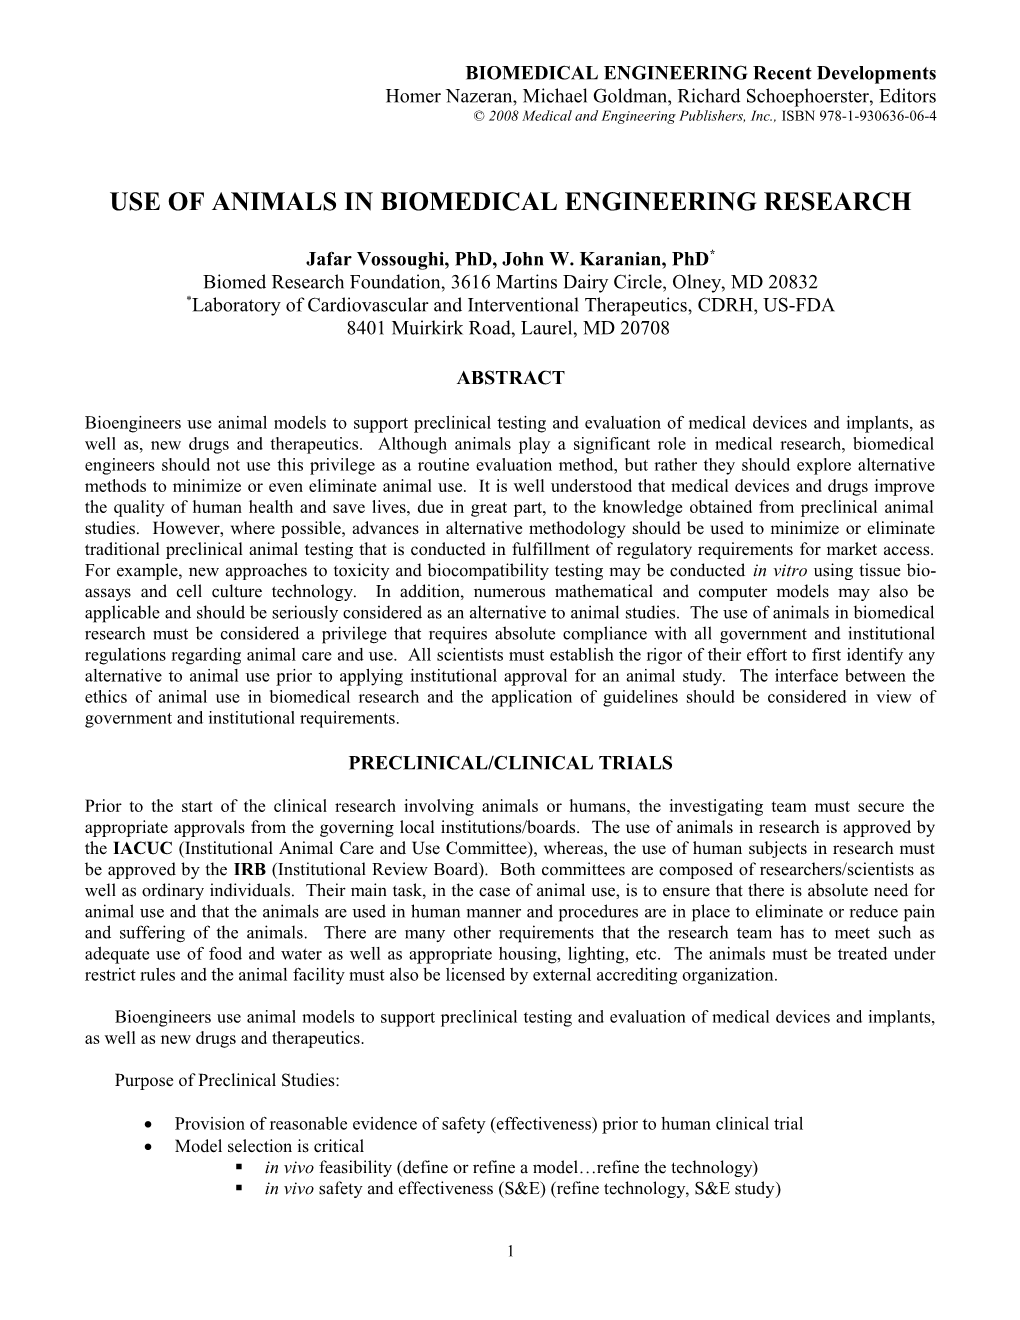 Use of Animals in Biomedical Engineering Research